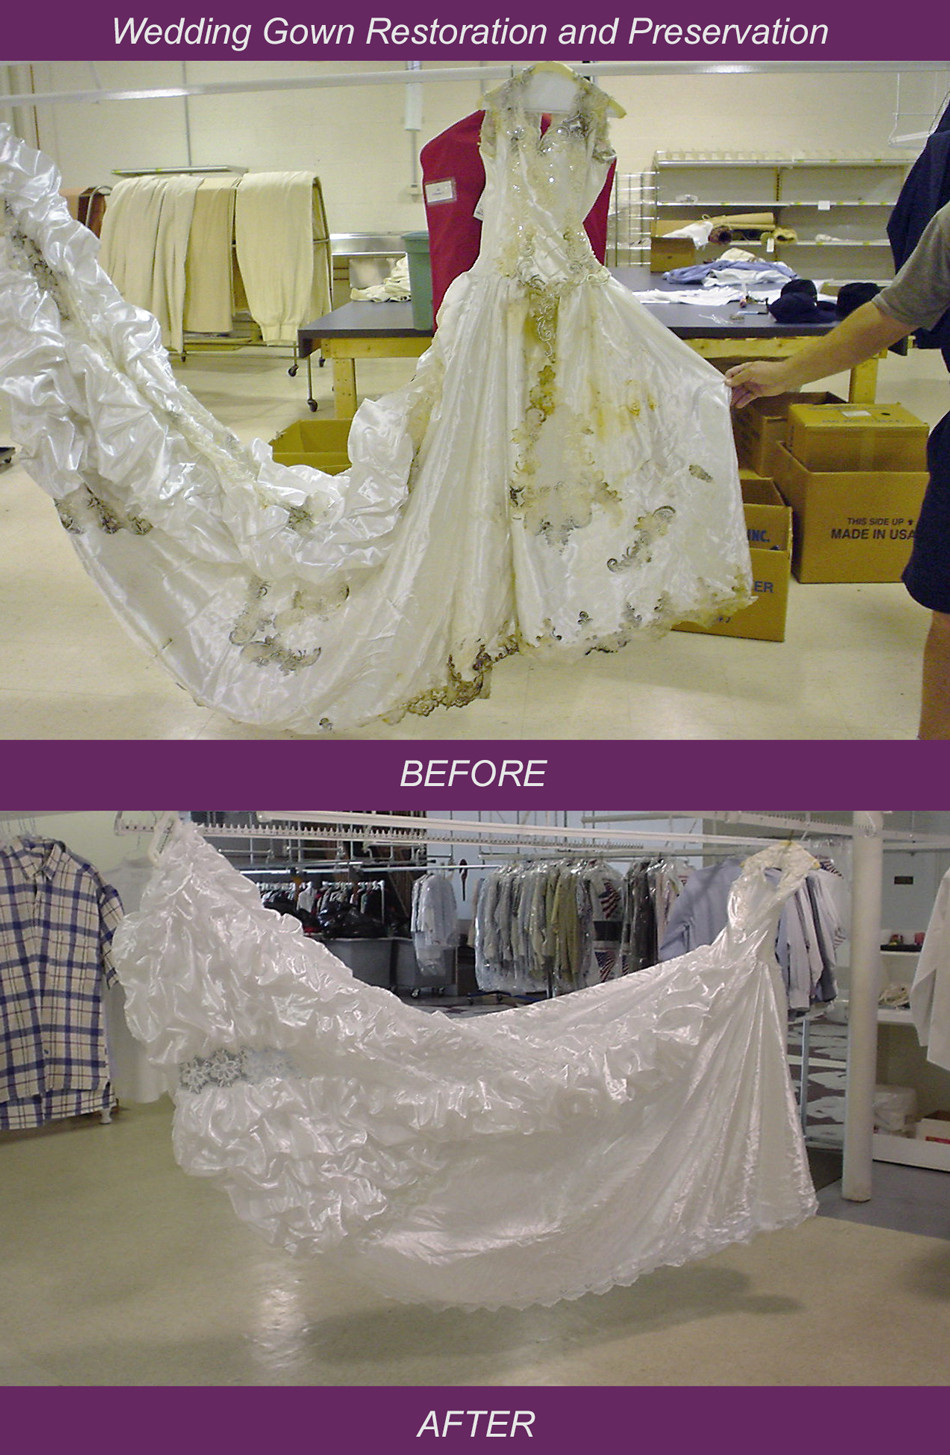 Wedding Gown Preservation Company Reviews
 Wedding Gown Preservation and Restoration